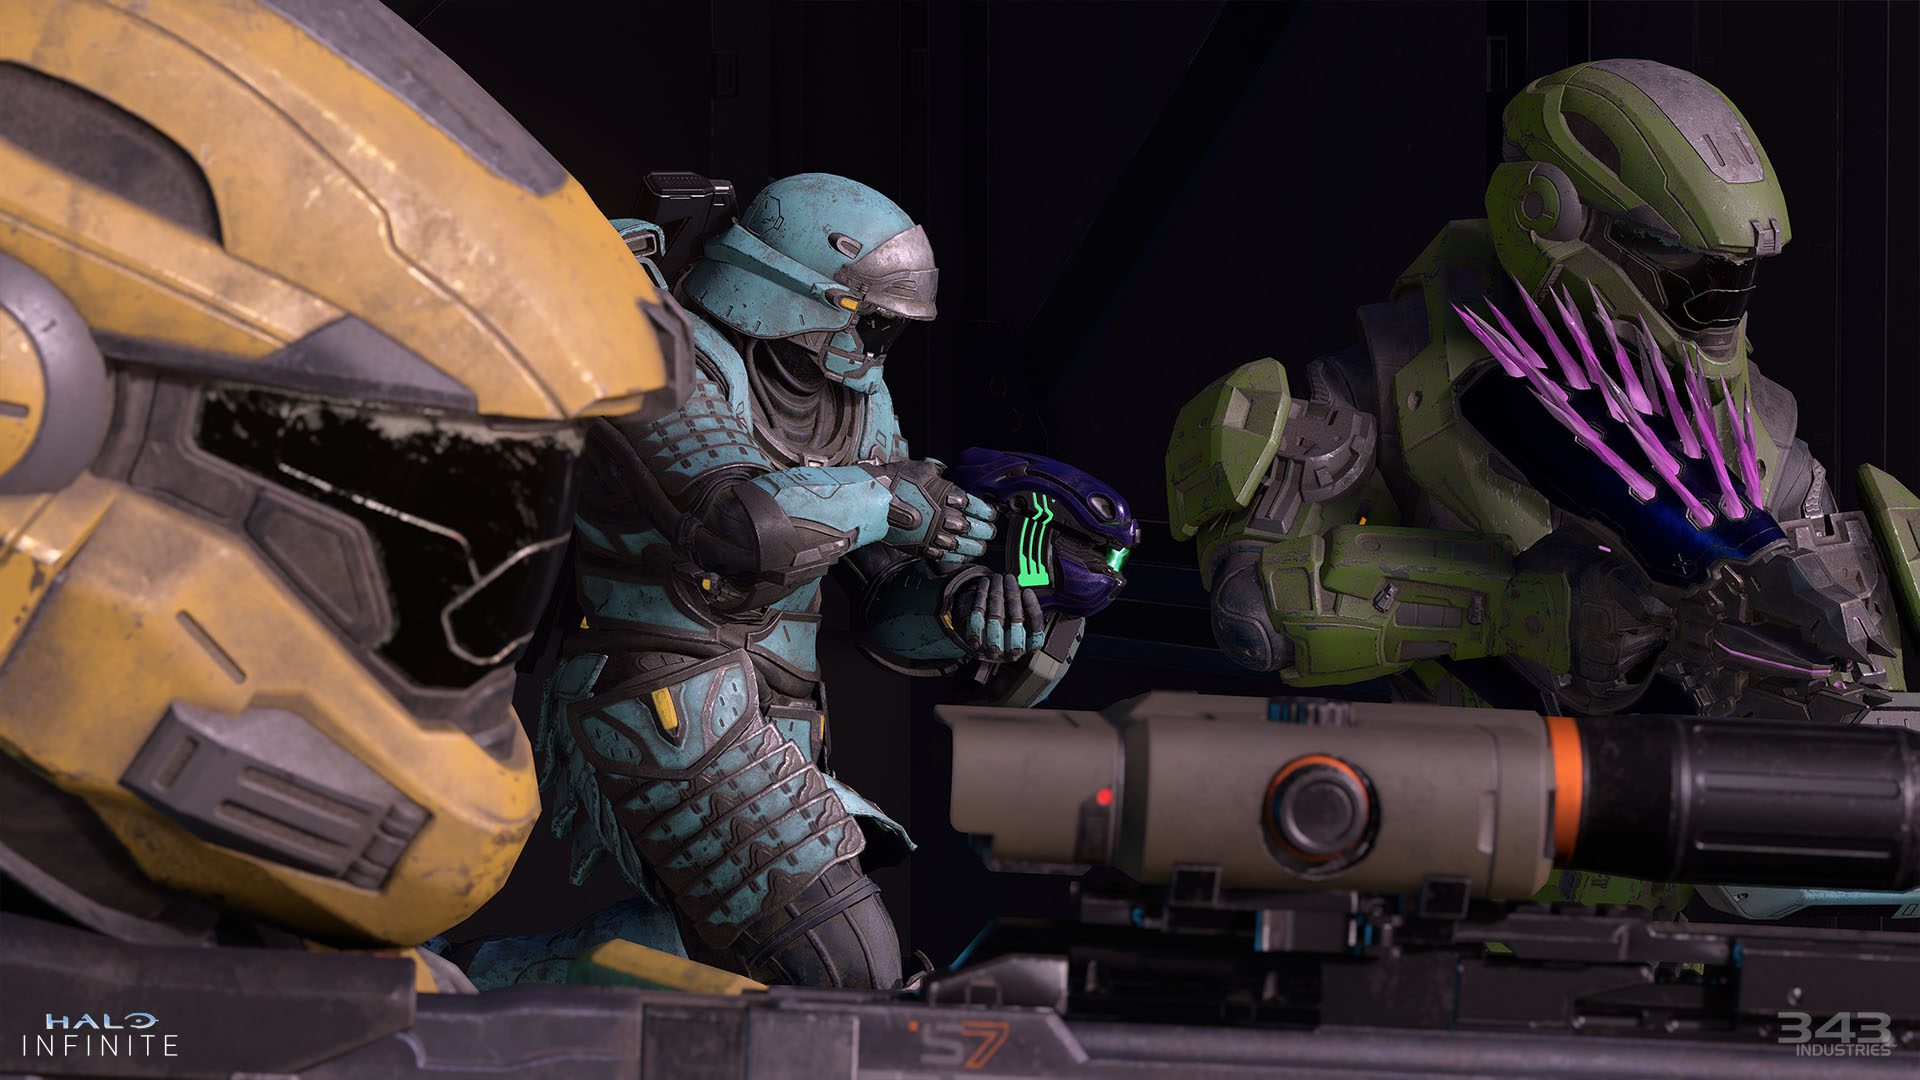 Halo Infinite Action screenshot of several Spartan Armor cores with Cadet skins